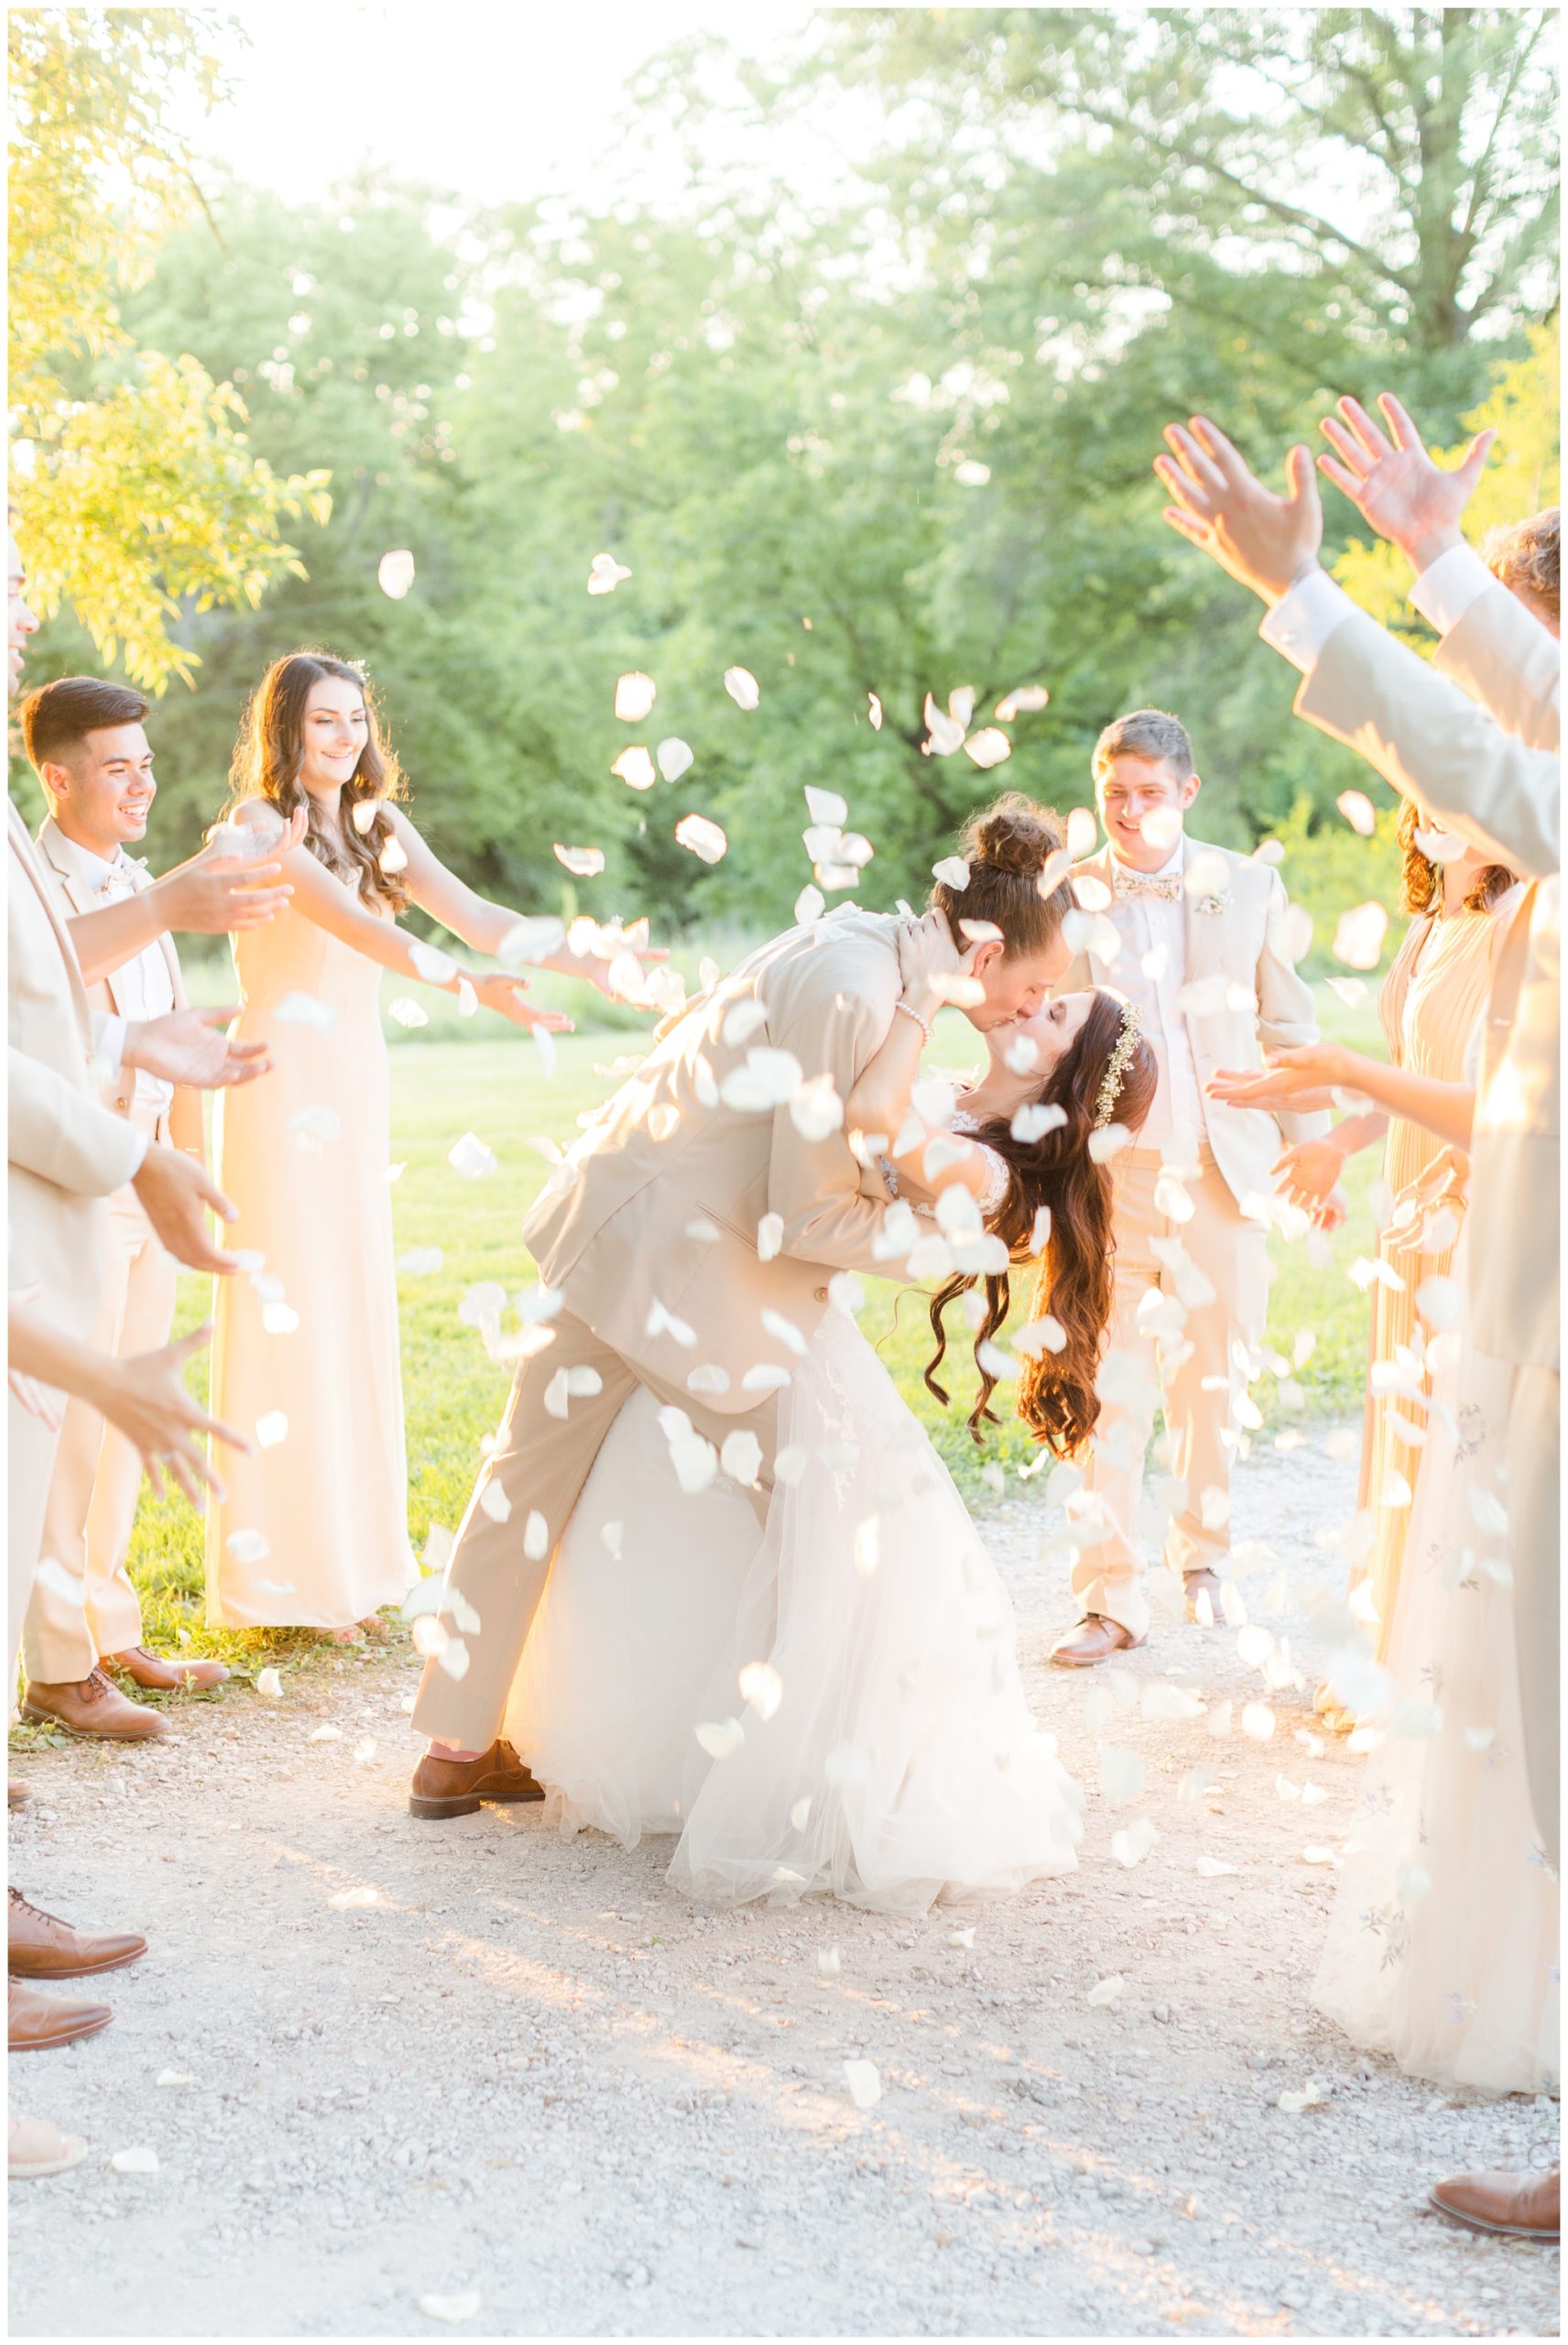 The wedding exit is pictured. The groom is dipping his new bride back with a kiss, and the wedding party is showering them with soft white flower petals. 